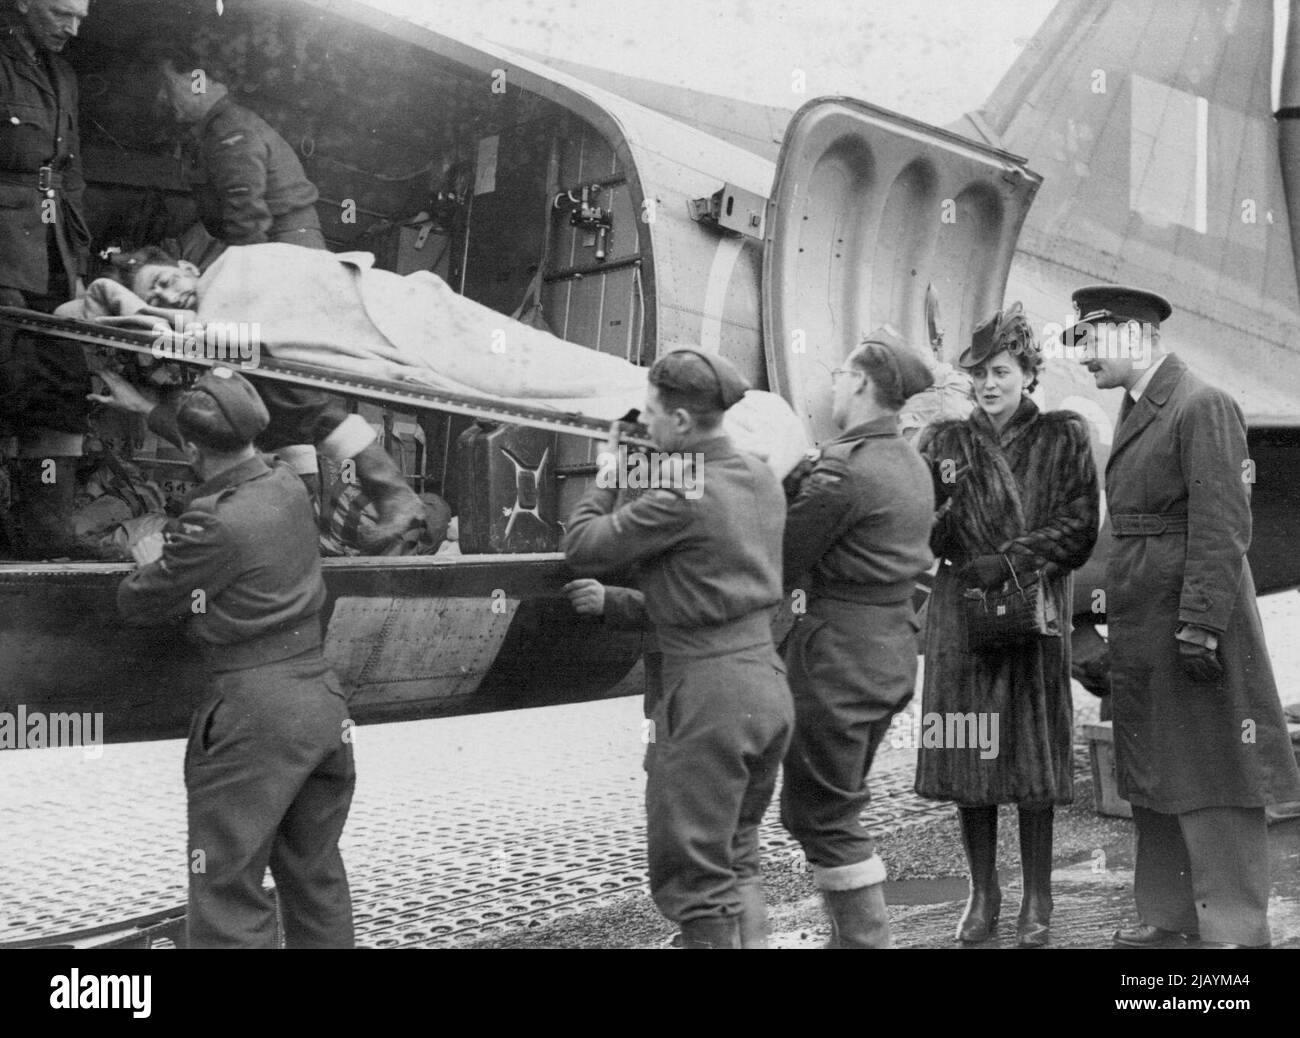 Duchess of Kent Visits West Country Aerodrome -- The Duchess of Kent (right) watches a stretcher case being taken out of a hospital plane. The Duchess of Kent visited a West Country aerodrome where she witnessed the arrival of wounded soldiers, who had been flown over from the Belgian Theatre of War. Since D-Day, R.A.F. Transport Command has flown 50,000 casualties to hospitals in England. December 8, 1944. Stock Photo